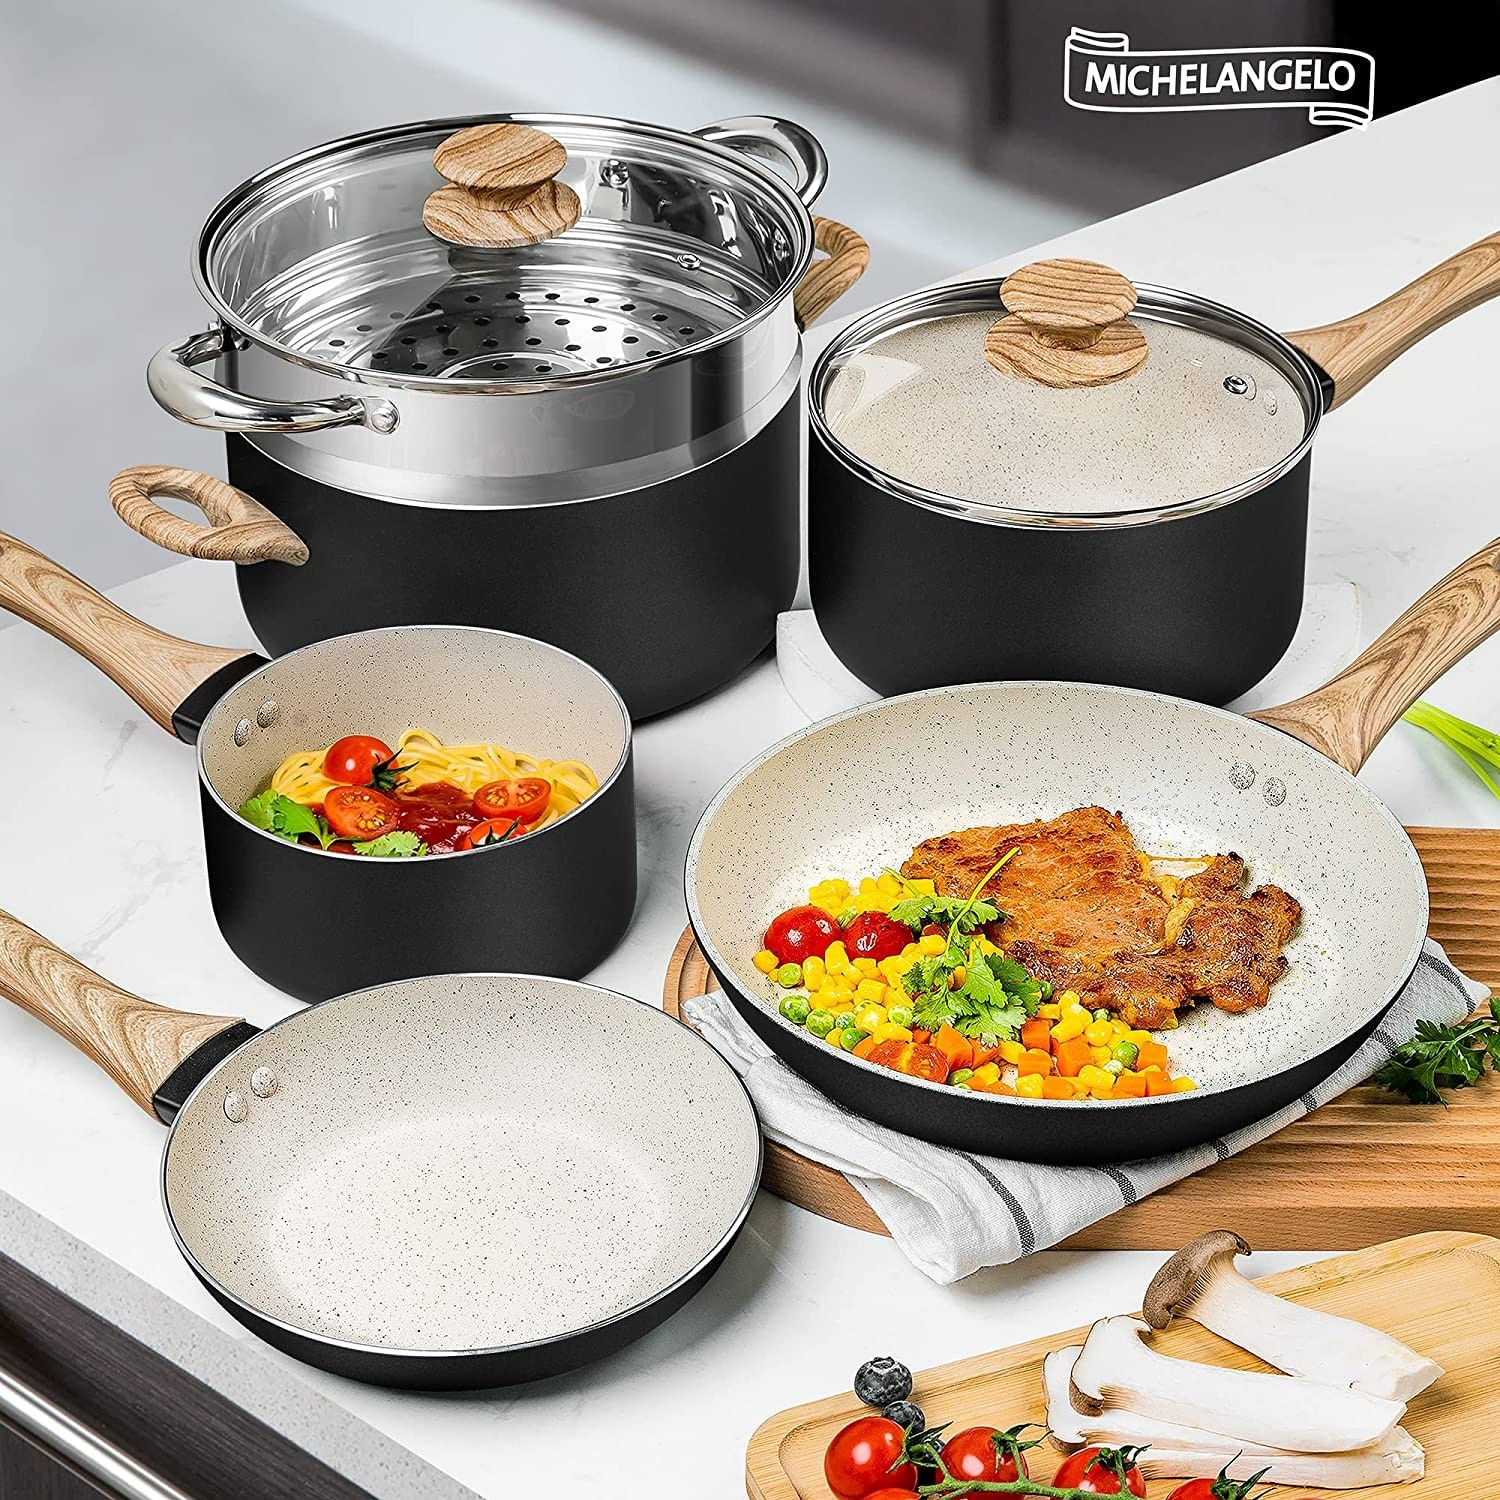 https://ak1.ostkcdn.com/images/products/is/images/direct/9f3bcaa08b4ecad81b2e5dc56415504c350ec916/Pot-and-Pan-Set-Nonstick%2C-12-Pcs-Kitchen-Cookware-Sets-with-Bakelite-Handle%2C-Non-Toxic-Cookware-Set-Induction-Compatible.jpg